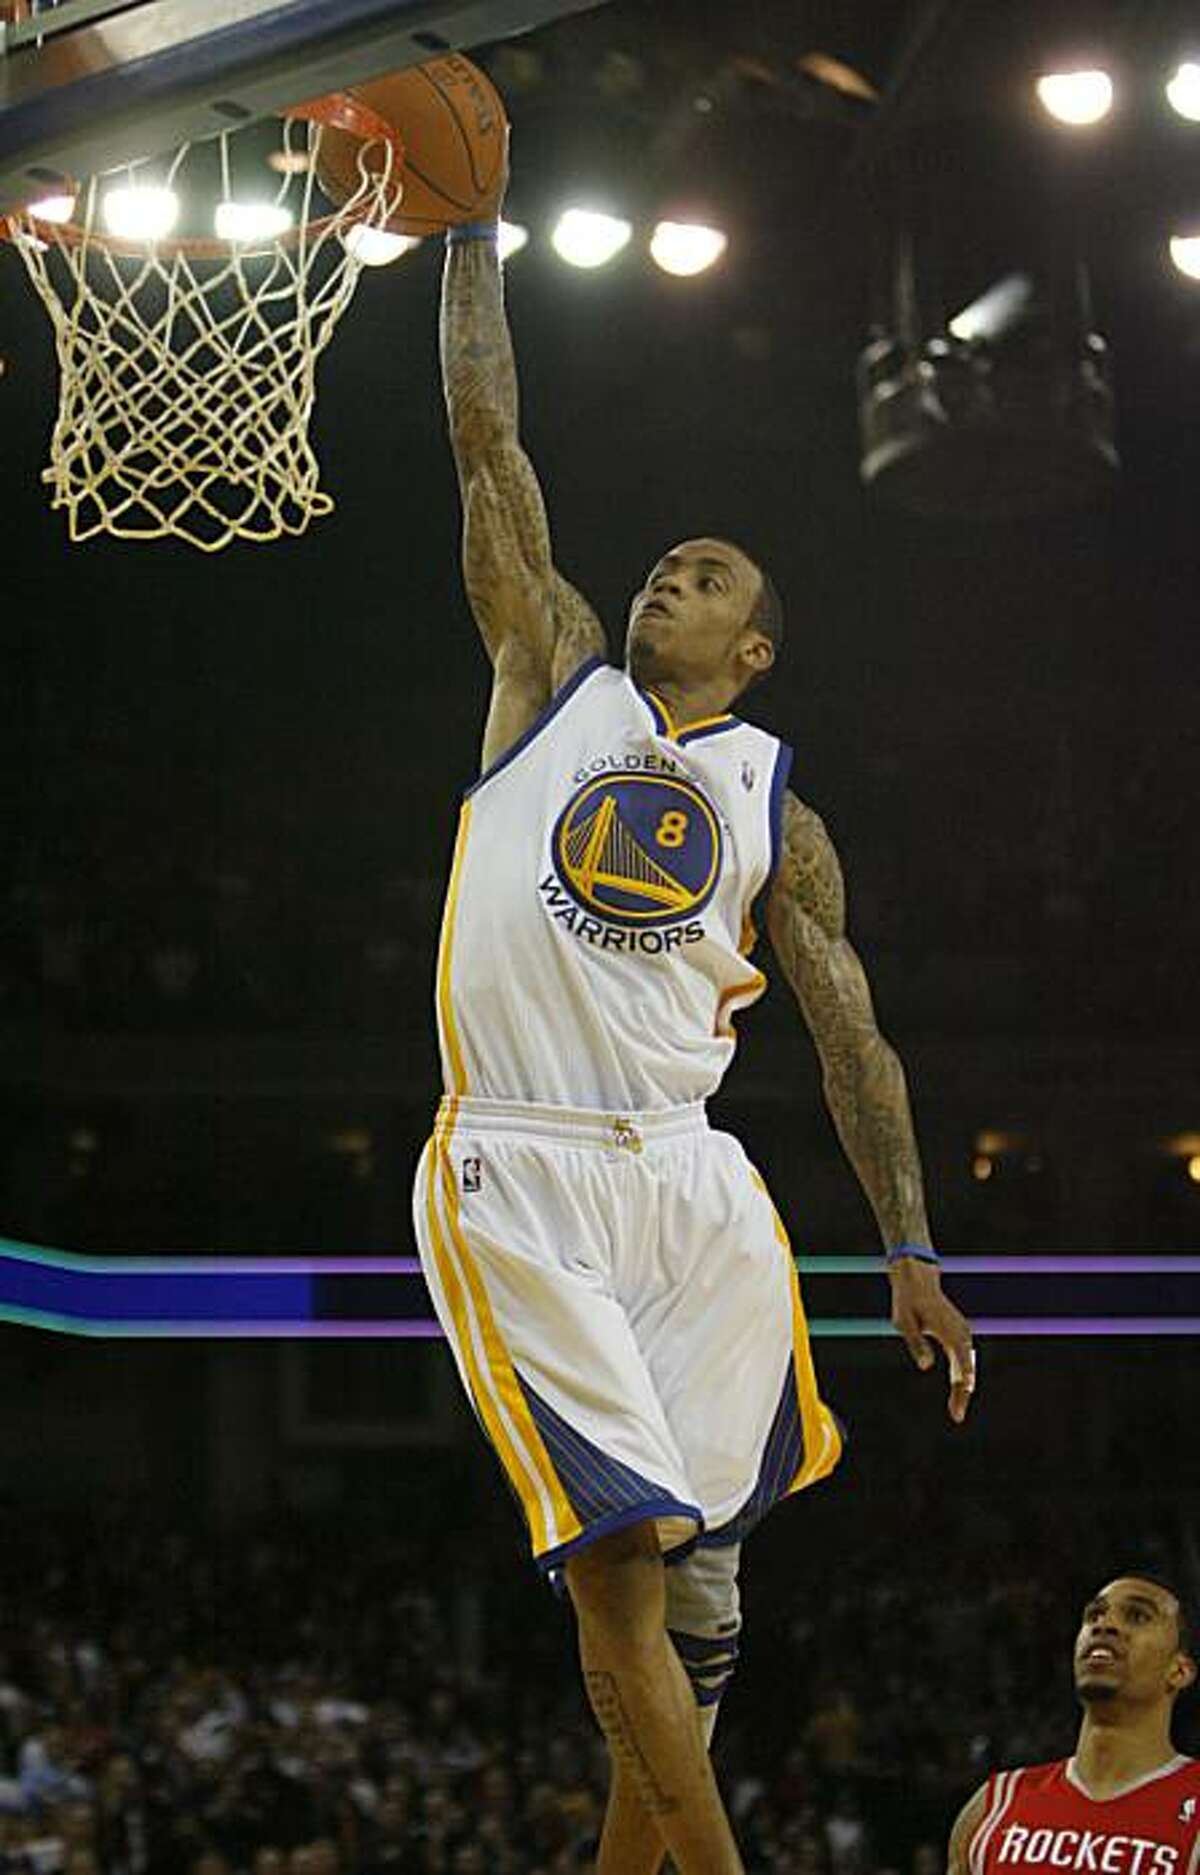 Golden Gate Warriors Monta Ellis, (8), scores against the Houston Rockets in the fourth quarter on Monday, Dec. 20, 2010 at the Oracle Arena in Oakland, Calif. The Golden Gate Warriors lose the Houston Rockets 112 to 121.